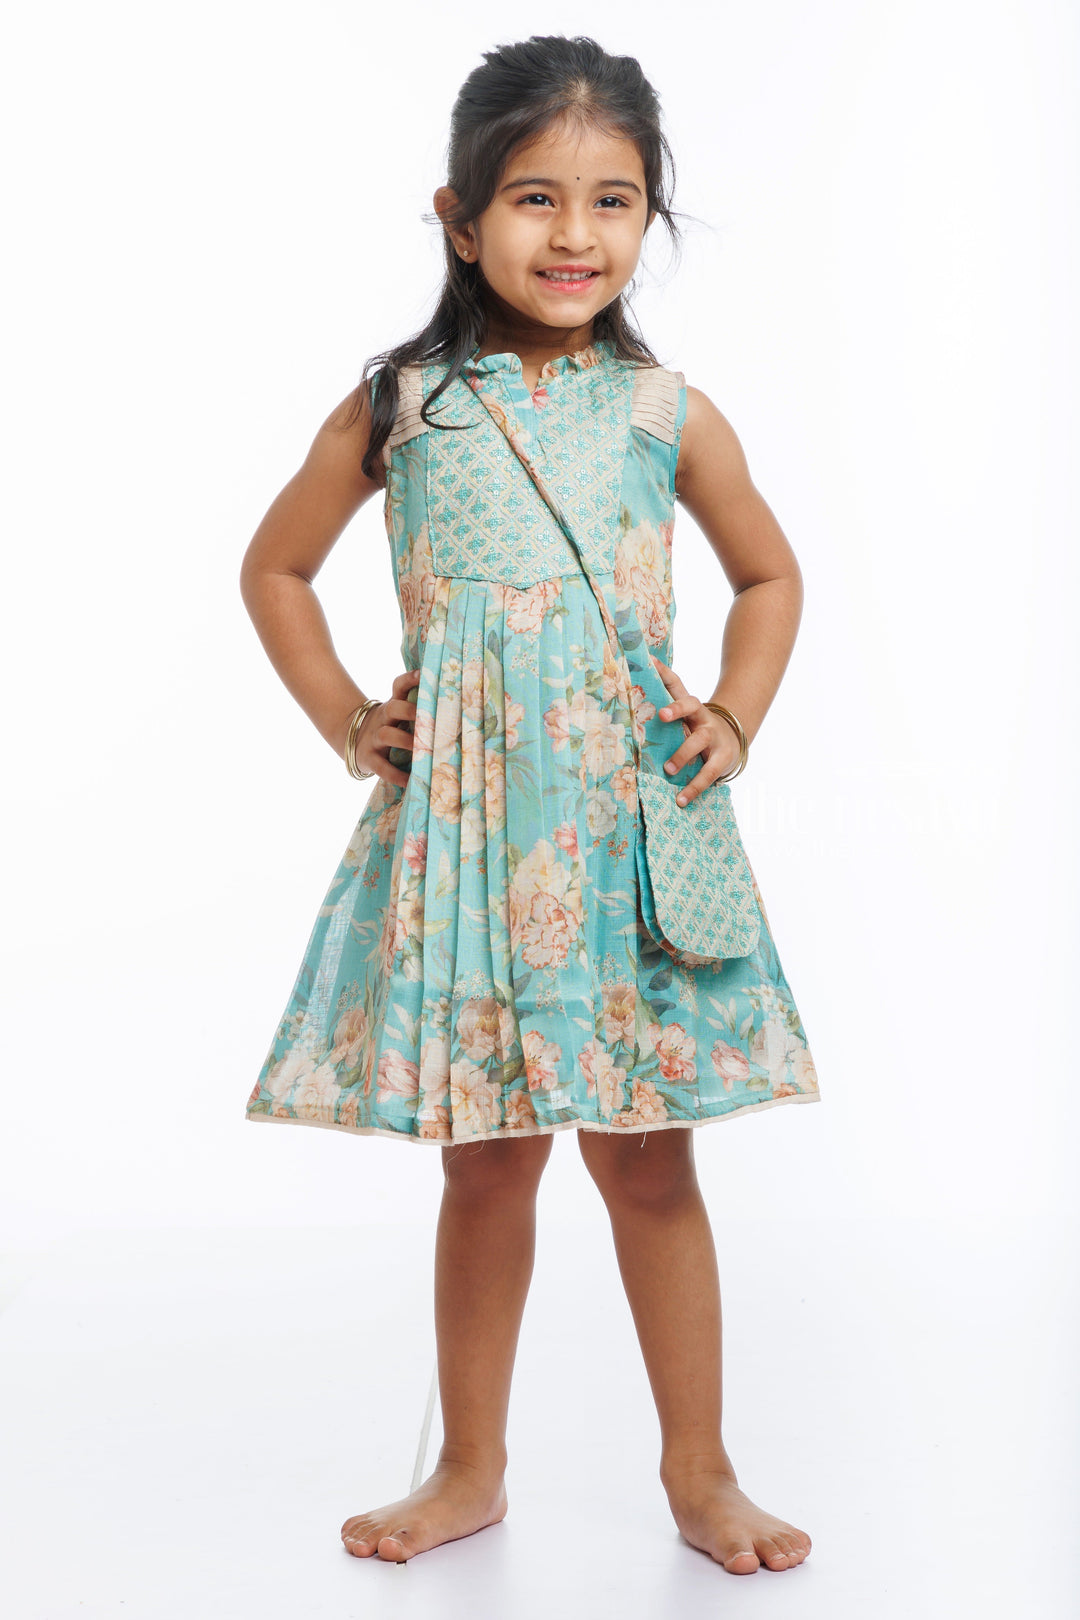 The Nesavu Girls Cotton Frock Floral Whimsy: Girls Designer Cotton Frock with Pastel Panache Nesavu 22 (4Y) / Green / Cotton GFC1299A-22 Shop the Latest Printed Cotton Frocks for Girls | Unique  Comfortable | The Nesavu